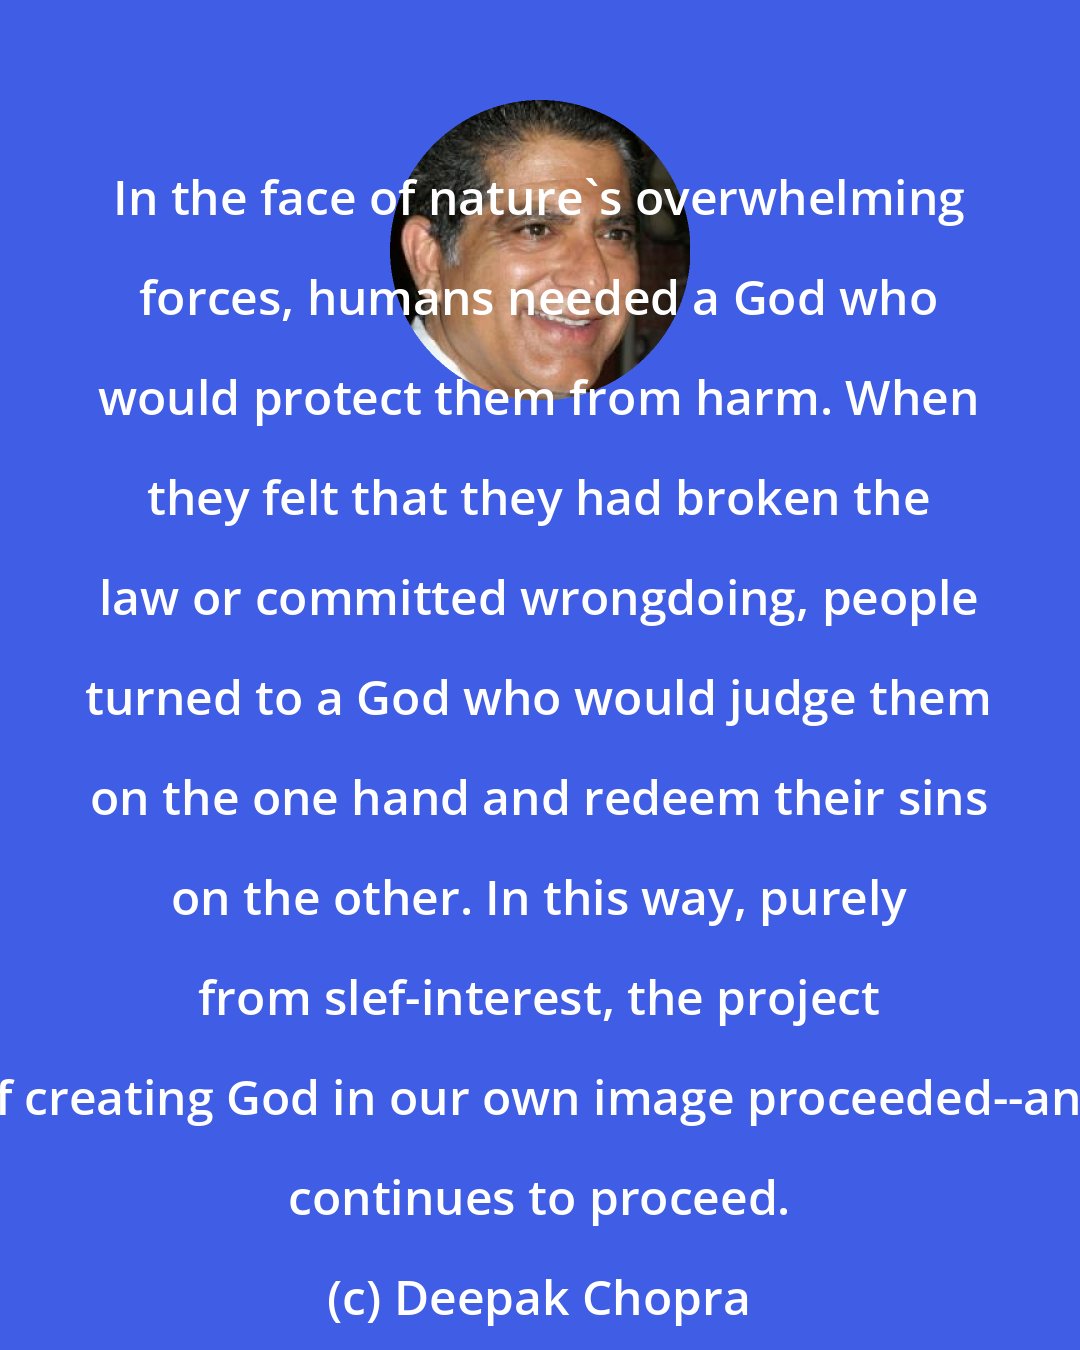 Deepak Chopra: In the face of nature's overwhelming forces, humans needed a God who would protect them from harm. When they felt that they had broken the law or committed wrongdoing, people turned to a God who would judge them on the one hand and redeem their sins on the other. In this way, purely from slef-interest, the project of creating God in our own image proceeded--and continues to proceed.